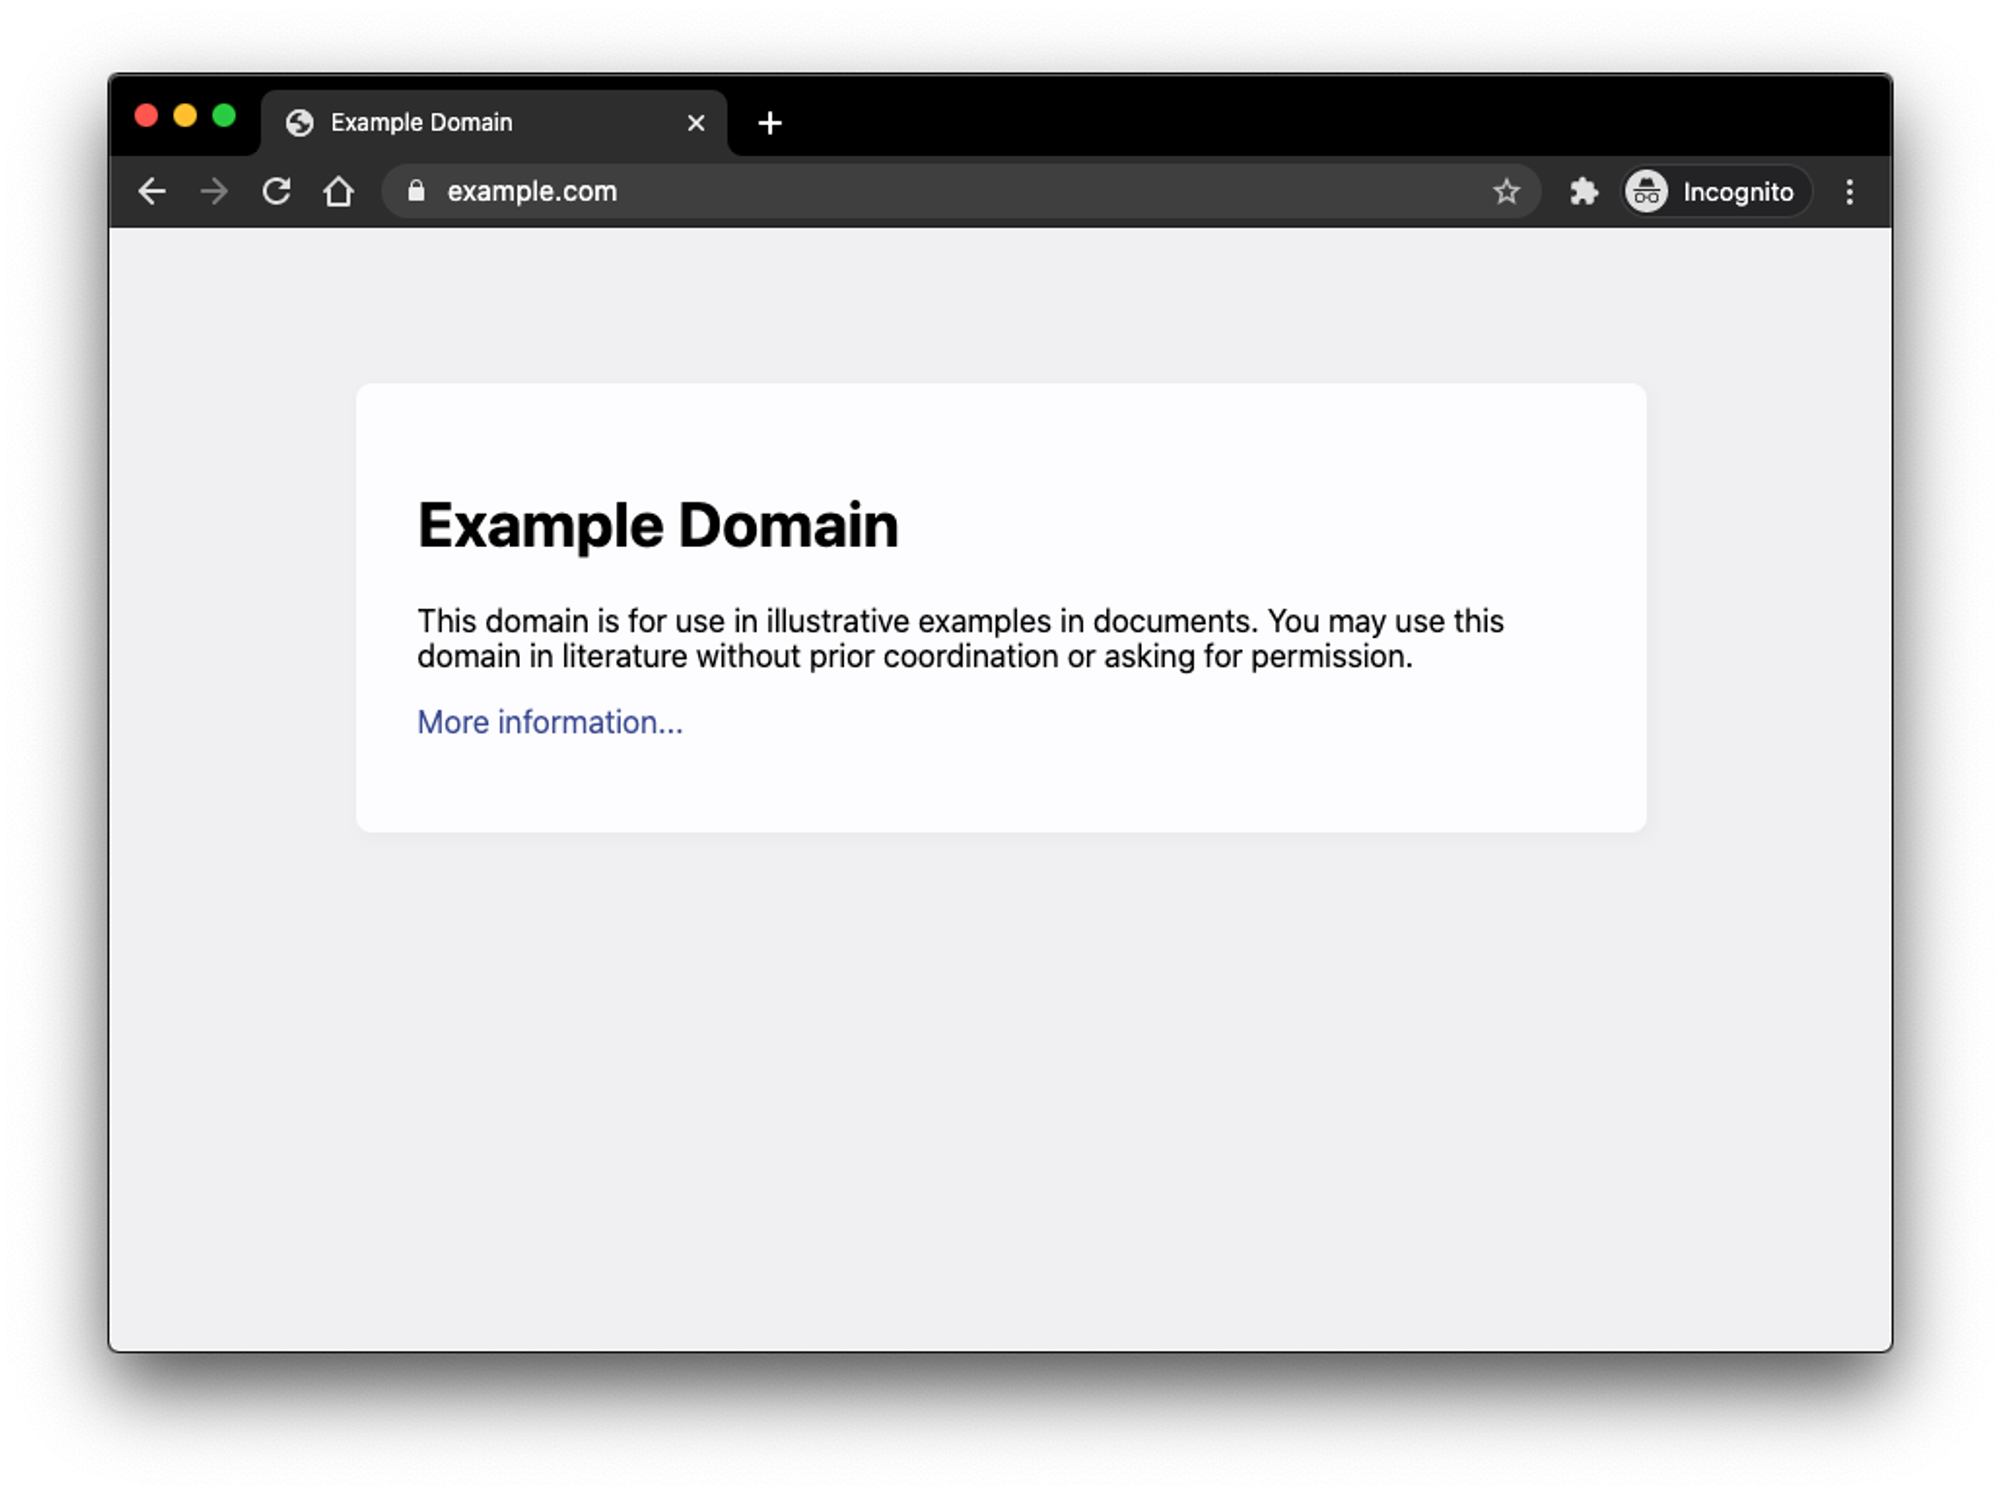 https://example.com is the website the sample extension targets